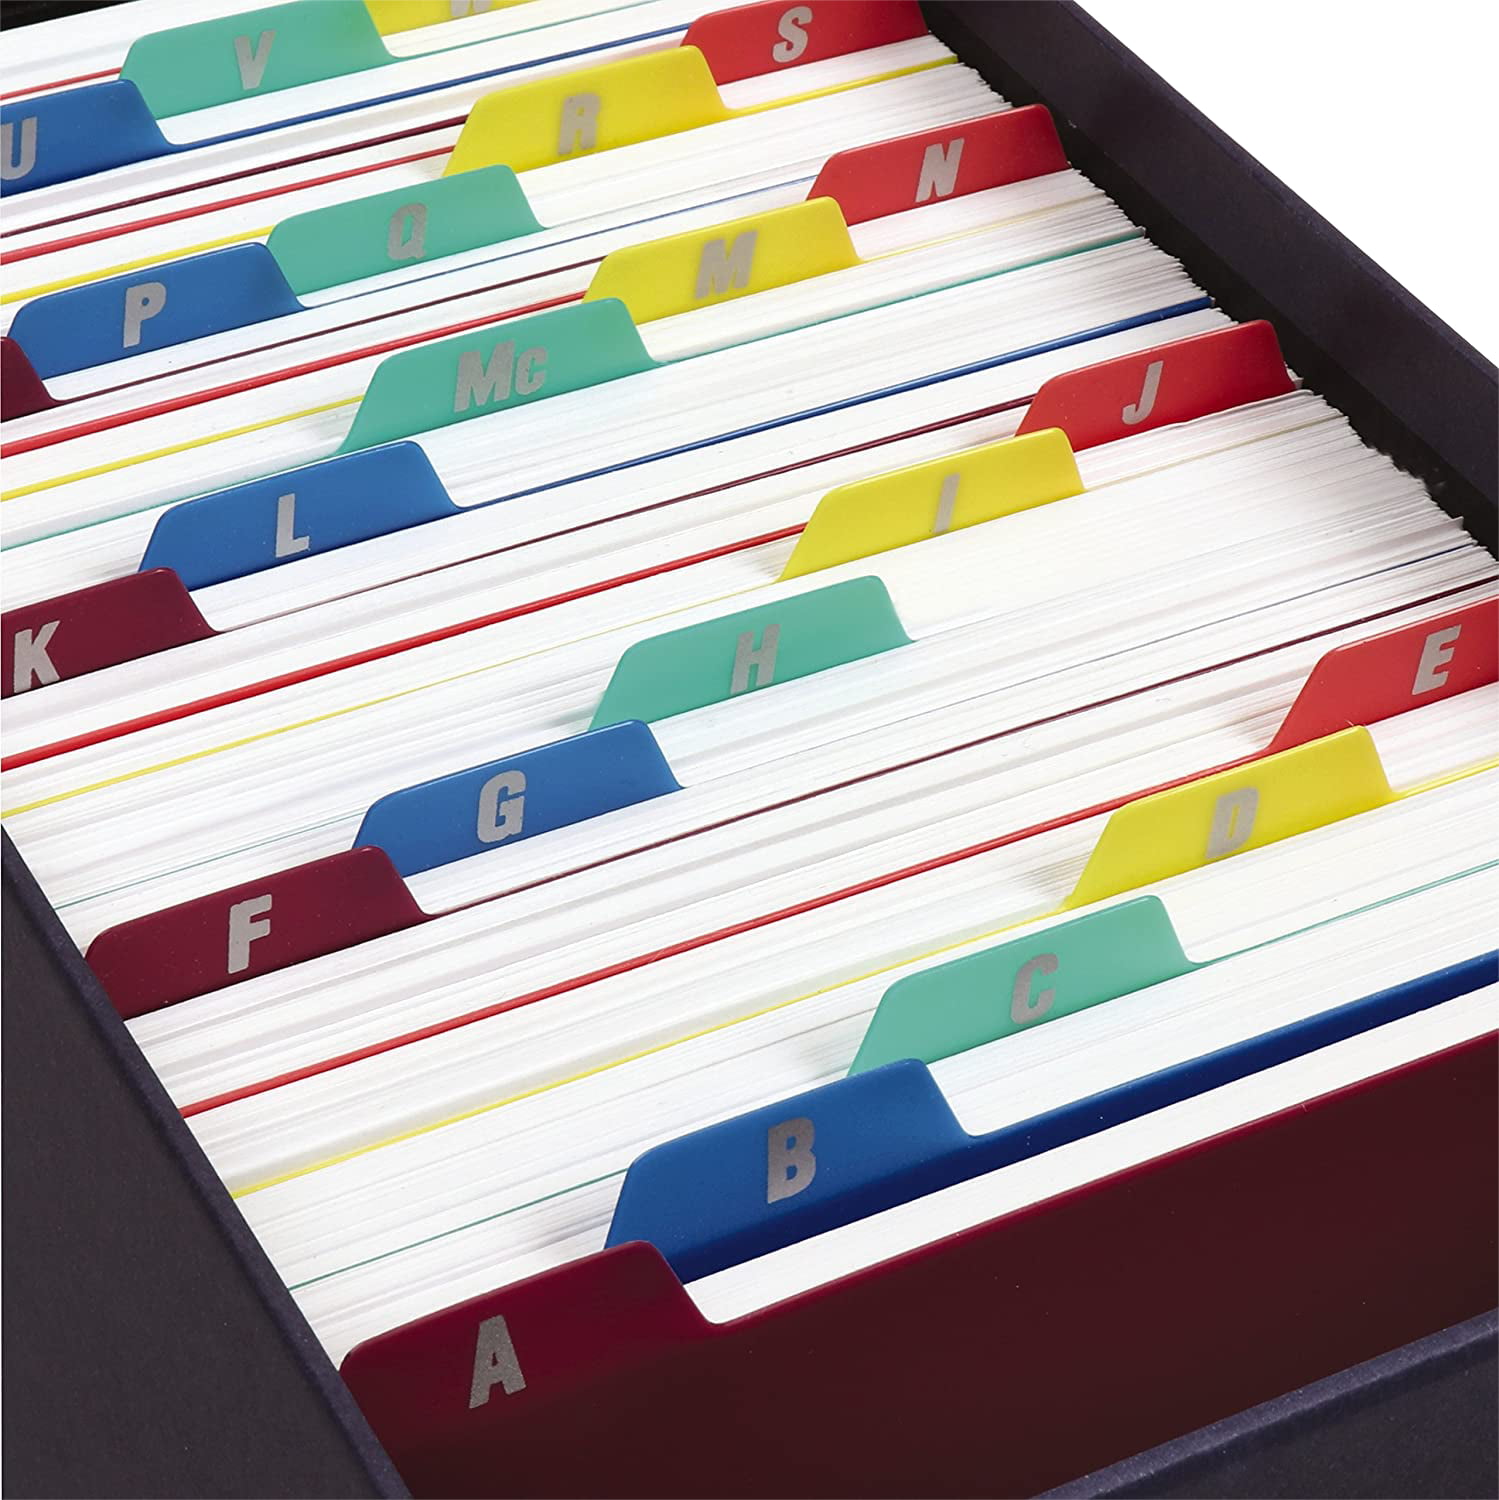 25 Guides per Set 73154 Assorted Colors A-Z Oxford Poly Index Card Guides Alphabetical 4 x 6 Size 2 